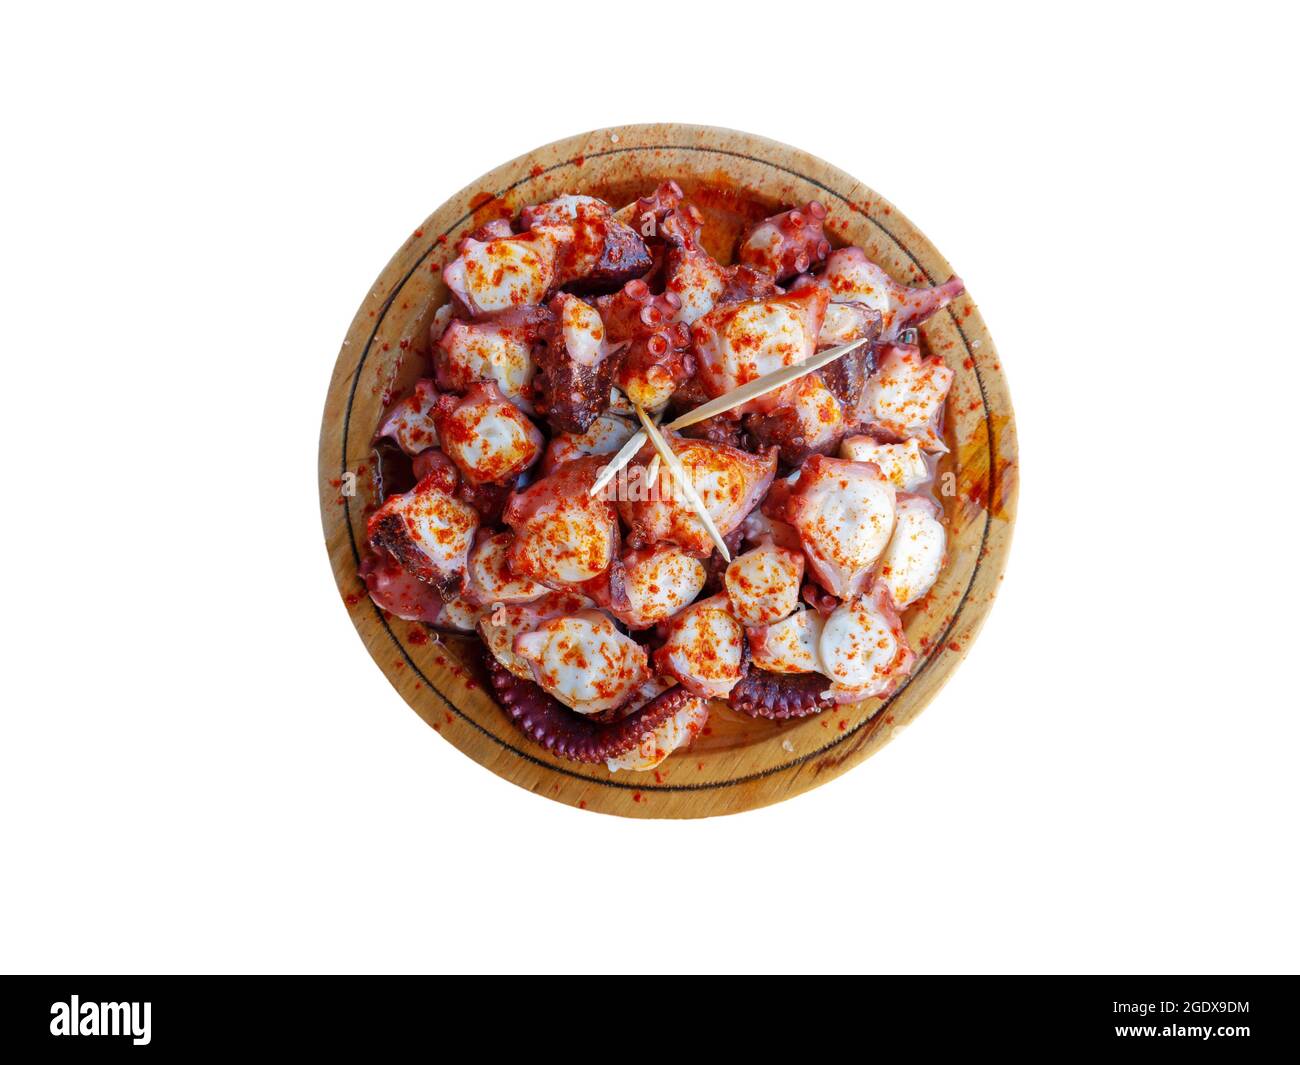 Polbo a feira meaning fair-style octopus in gallego or pulpo a la gallega in Spanish meaning Galician-style octopus a traditional Galician dish. Isola Stock Photo